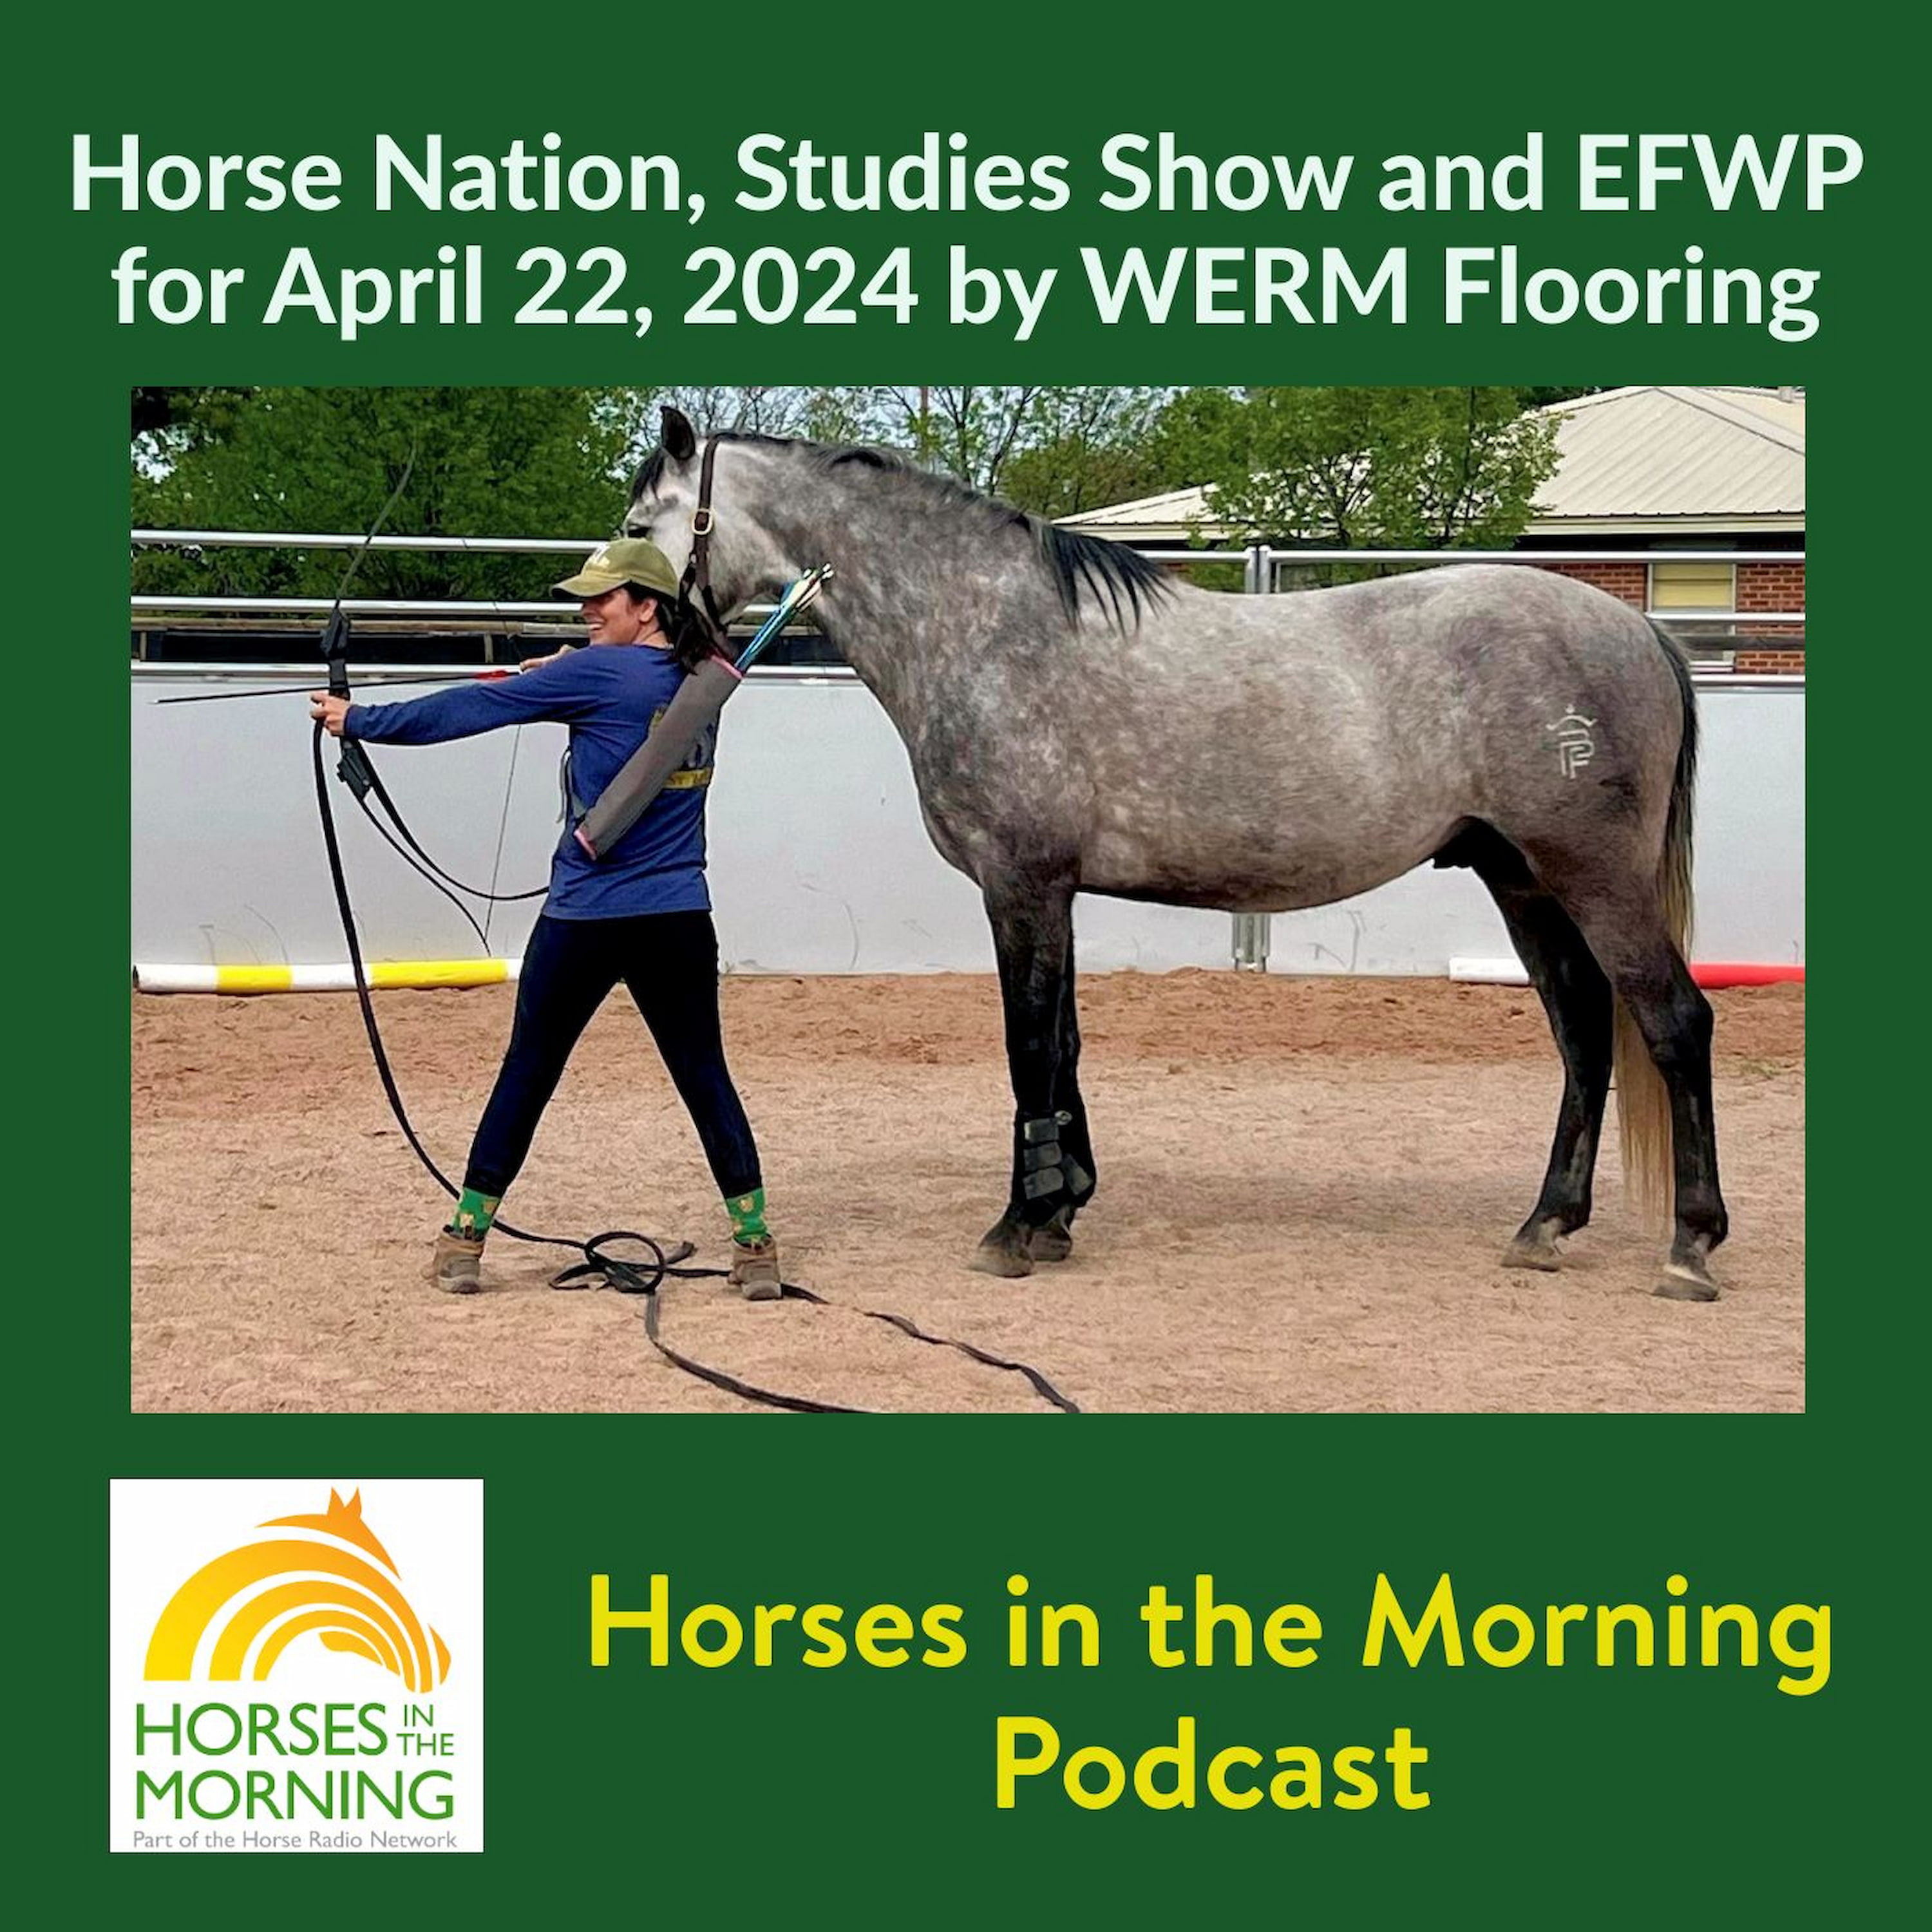 Horse Nation, Studies Show and EFWP for April 22, 2024 by WERM Flooring